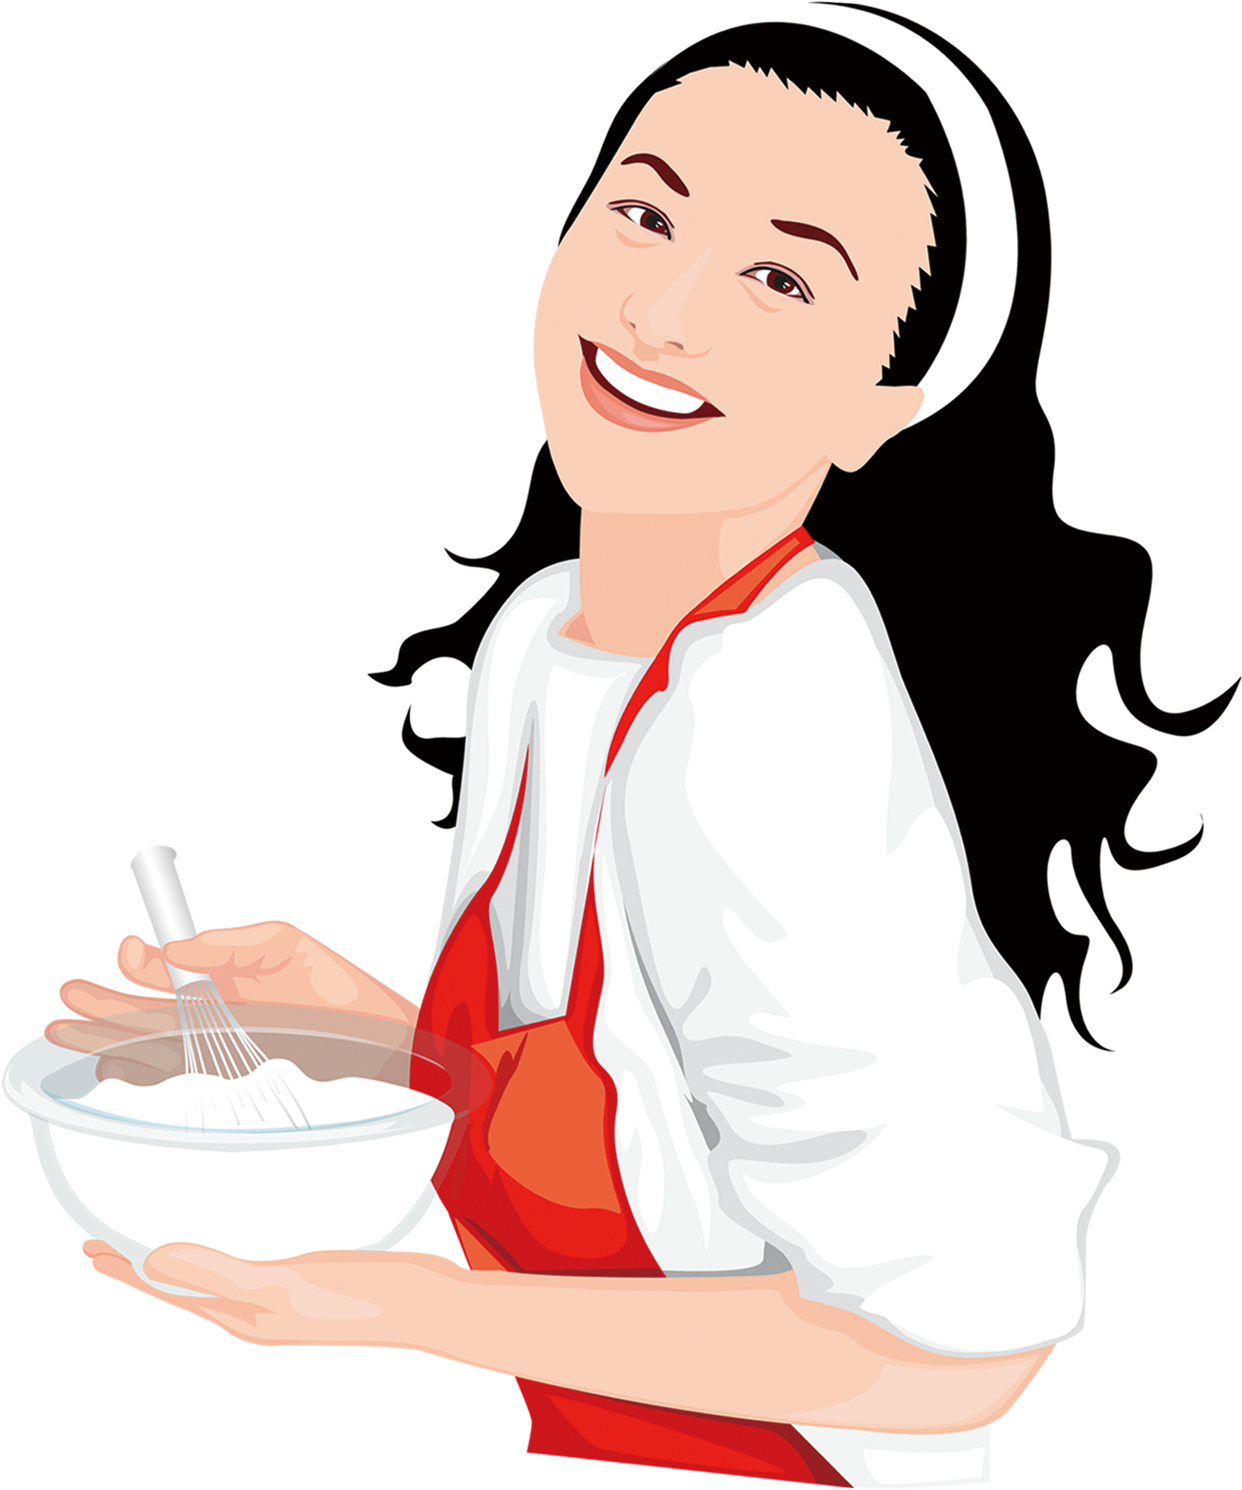 A Woman Wearing An Apron And Holding A Bowl Of Flour